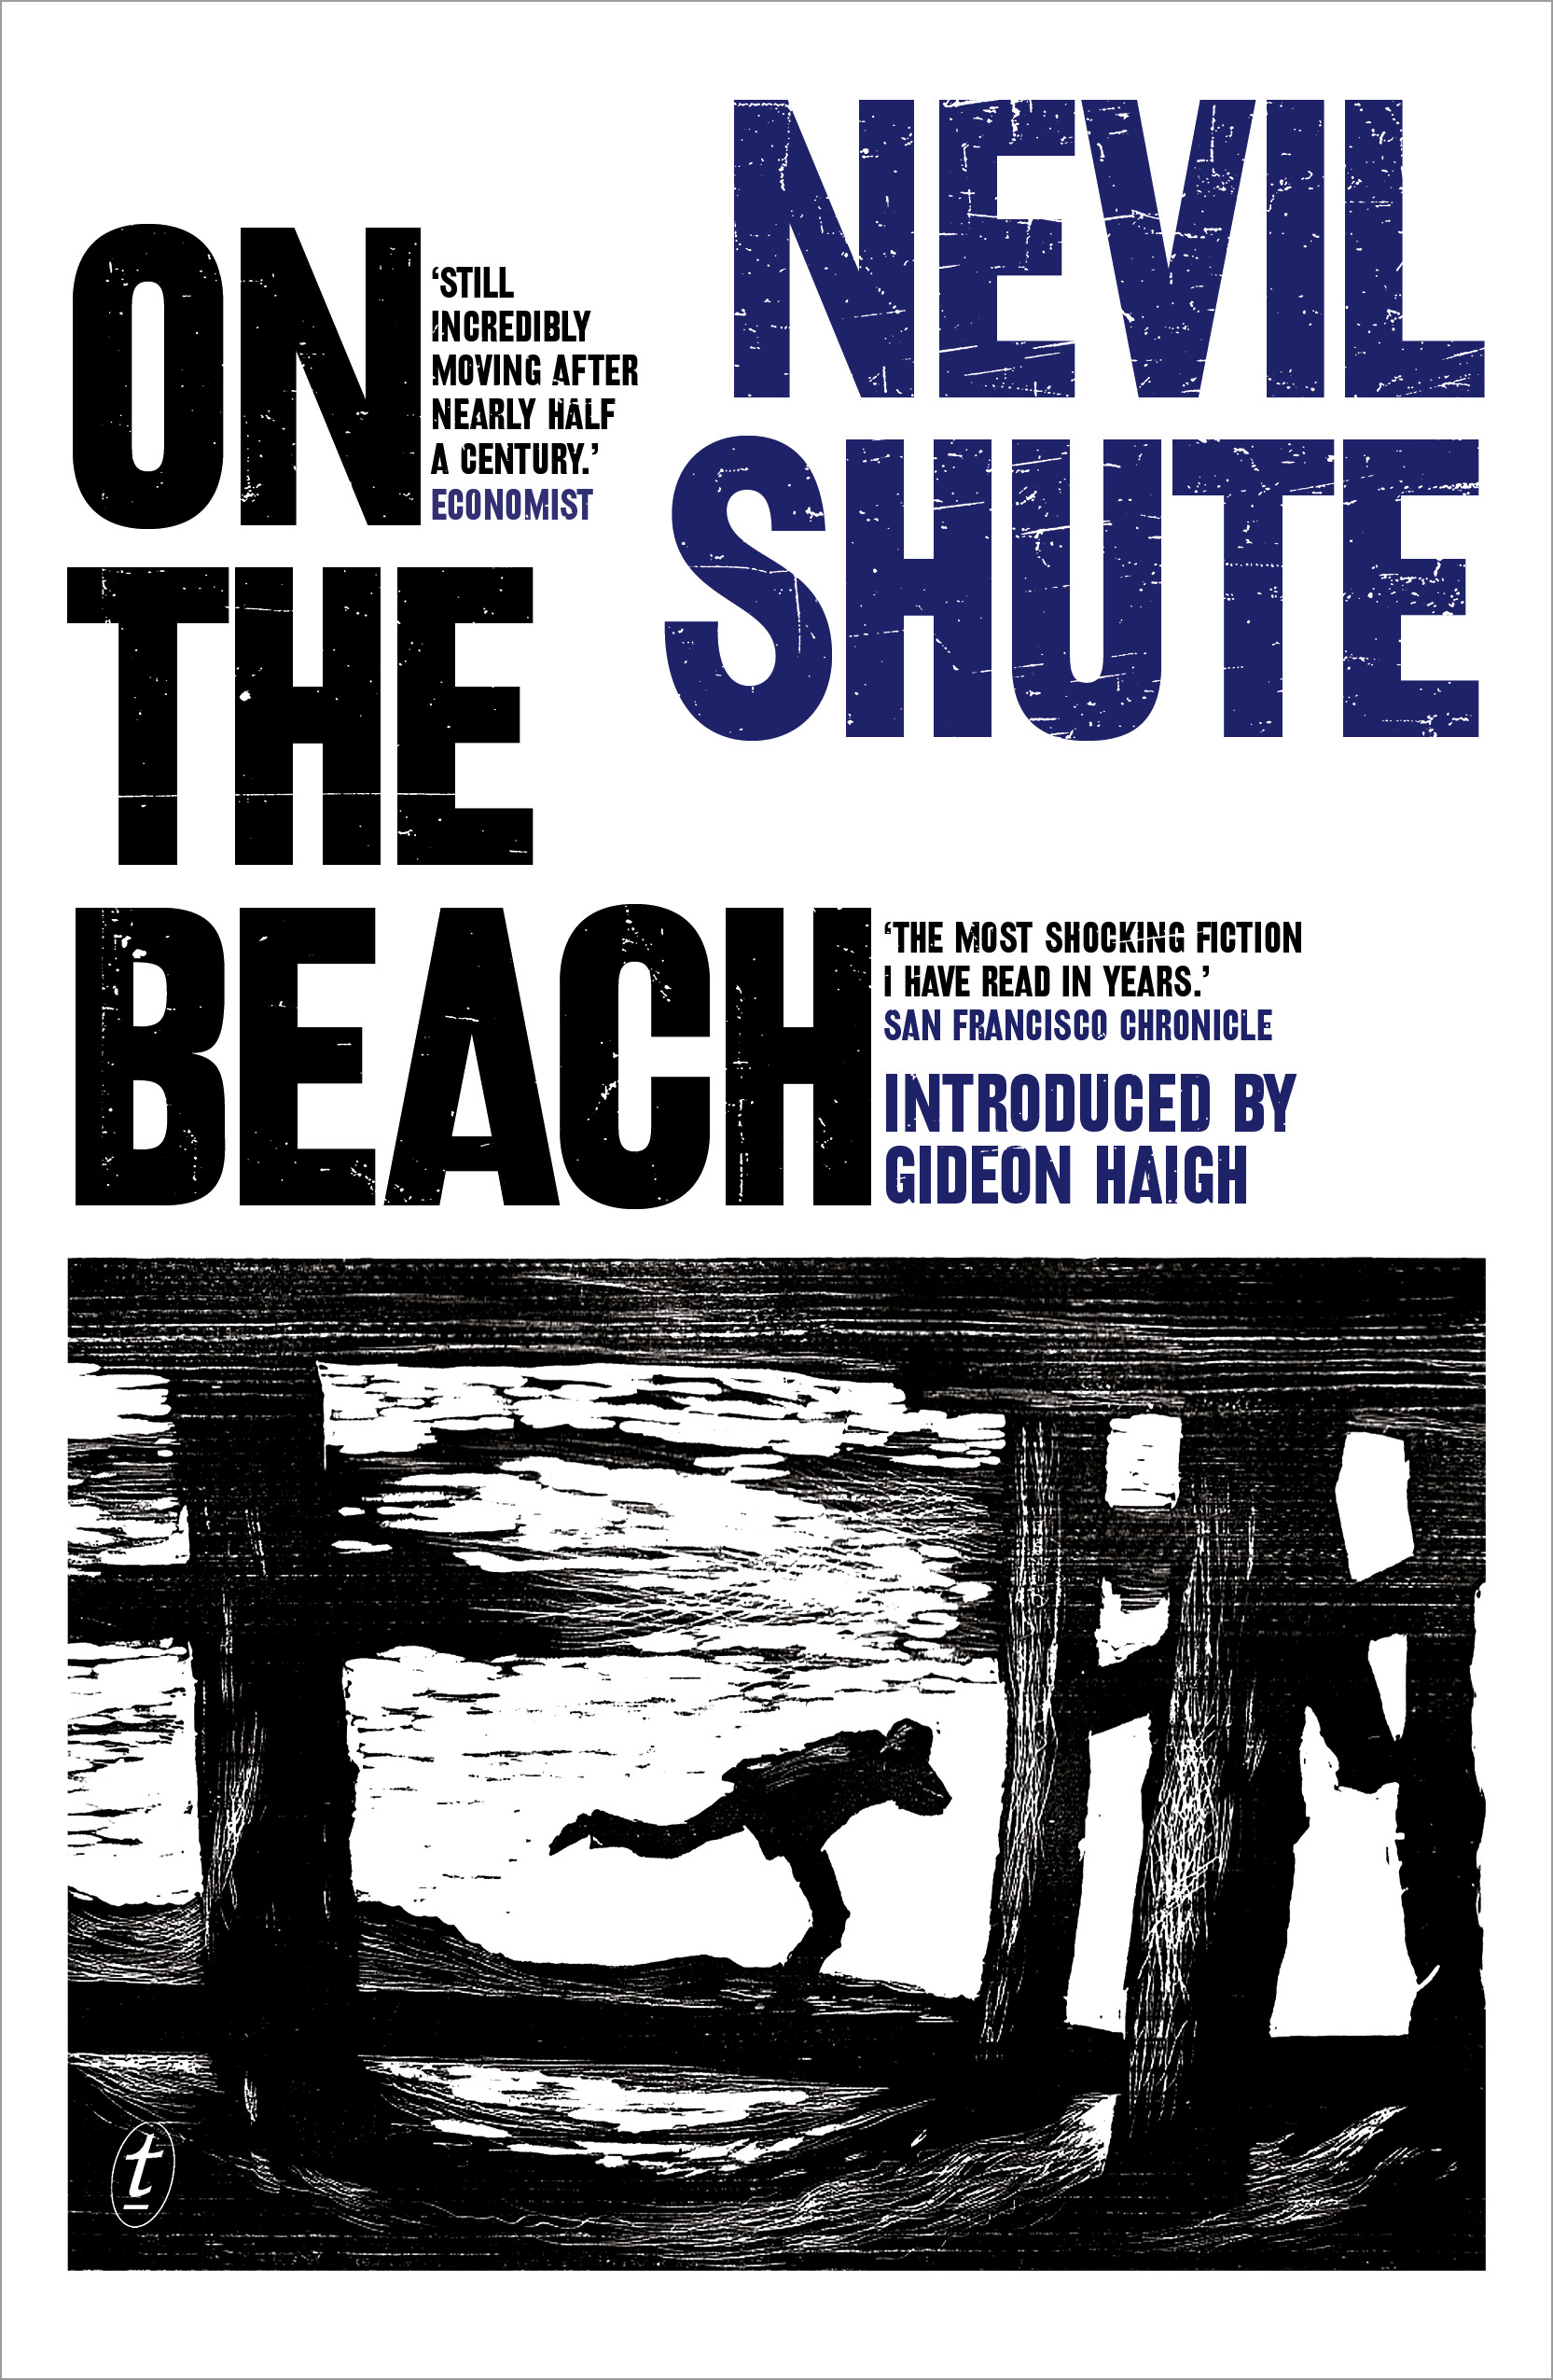 book review on the beach nevil shute